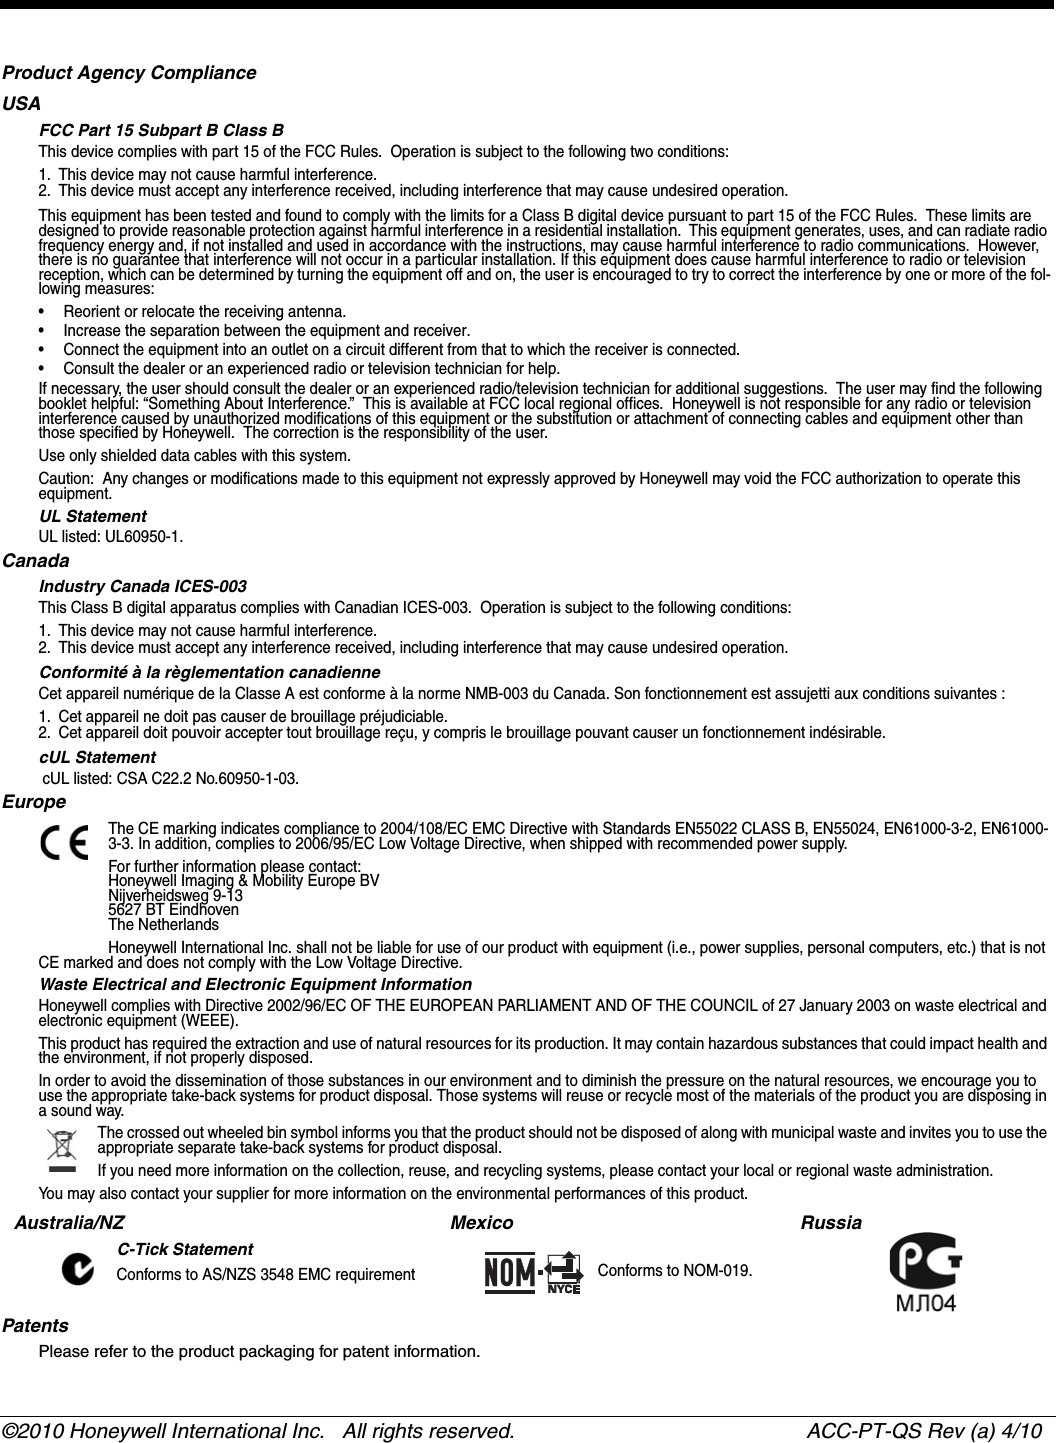 ©2010 Honeywell International Inc.   All rights reserved.  ACC-PT-QS Rev (a) 4/10Preliminary Draft 4/28/10Product Agency ComplianceUSAFCC Part 15 Subpart B Class BThis device complies with part 15 of the FCC Rules.  Operation is subject to the following two conditions:1. This device may not cause harmful interference.2. This device must accept any interference received, including interference that may cause undesired operation.This equipment has been tested and found to comply with the limits for a Class B digital device pursuant to part 15 of the FCC Rules.  These limits are designed to provide reasonable protection against harmful interference in a residential installation.  This equipment generates, uses, and can radiate radio frequency energy and, if not installed and used in accordance with the instructions, may cause harmful interference to radio communications.  However, there is no guarantee that interference will not occur in a particular installation. If this equipment does cause harmful interference to radio or television reception, which can be determined by turning the equipment off and on, the user is encouraged to try to correct the interference by one or more of the fol-lowing measures:• Reorient or relocate the receiving antenna.• Increase the separation between the equipment and receiver.• Connect the equipment into an outlet on a circuit different from that to which the receiver is connected.• Consult the dealer or an experienced radio or television technician for help.If necessary, the user should consult the dealer or an experienced radio/television technician for additional suggestions.  The user may find the following booklet helpful: “Something About Interference.”  This is available at FCC local regional offices.  Honeywell is not responsible for any radio or television interference caused by unauthorized modifications of this equipment or the substitution or attachment of connecting cables and equipment other than those specified by Honeywell.  The correction is the responsibility of the user.  Use only shielded data cables with this system.Caution:  Any changes or modifications made to this equipment not expressly approved by Honeywell may void the FCC authorization to operate this equipment.UL StatementUL listed: UL60950-1.CanadaIndustry Canada ICES-003This Class B digital apparatus complies with Canadian ICES-003.  Operation is subject to the following conditions:1. This device may not cause harmful interference.2. This device must accept any interference received, including interference that may cause undesired operation.Conformité à la règlementation canadienneCet appareil numérique de la Classe A est conforme à la norme NMB-003 du Canada. Son fonctionnement est assujetti aux conditions suivantes :1. Cet appareil ne doit pas causer de brouillage préjudiciable.2. Cet appareil doit pouvoir accepter tout brouillage reçu, y compris le brouillage pouvant causer un fonctionnement indésirable.  cUL Statement cUL listed: CSA C22.2 No.60950-1-03.EuropeThe CE marking indicates compliance to 2004/108/EC EMC Directive with Standards EN55022 CLASS B, EN55024, EN61000-3-2, EN61000-3-3. In addition, complies to 2006/95/EC Low Voltage Directive, when shipped with recommended power supply.For further information please contact:Honeywell Imaging &amp; Mobility Europe BVNijverheidsweg 9-135627 BT EindhovenThe NetherlandsHoneywell International Inc. shall not be liable for use of our product with equipment (i.e., power supplies, personal computers, etc.) that is not CE marked and does not comply with the Low Voltage Directive.Waste Electrical and Electronic Equipment InformationHoneywell complies with Directive 2002/96/EC OF THE EUROPEAN PARLIAMENT AND OF THE COUNCIL of 27 January 2003 on waste electrical and electronic equipment (WEEE).This product has required the extraction and use of natural resources for its production. It may contain hazardous substances that could impact health and the environment, if not properly disposed.In order to avoid the dissemination of those substances in our environment and to diminish the pressure on the natural resources, we encourage you to use the appropriate take-back systems for product disposal. Those systems will reuse or recycle most of the materials of the product you are disposing in a sound way.The crossed out wheeled bin symbol informs you that the product should not be disposed of along with municipal waste and invites you to use the appropriate separate take-back systems for product disposal.If you need more information on the collection, reuse, and recycling systems, please contact your local or regional waste administration.You may also contact your supplier for more information on the environmental performances of this product.PatentsPlease refer to the product packaging for patent information.Australia/NZC-Tick StatementConforms to AS/NZS 3548 EMC requirementMexico  Conforms to NOM-019.Russia